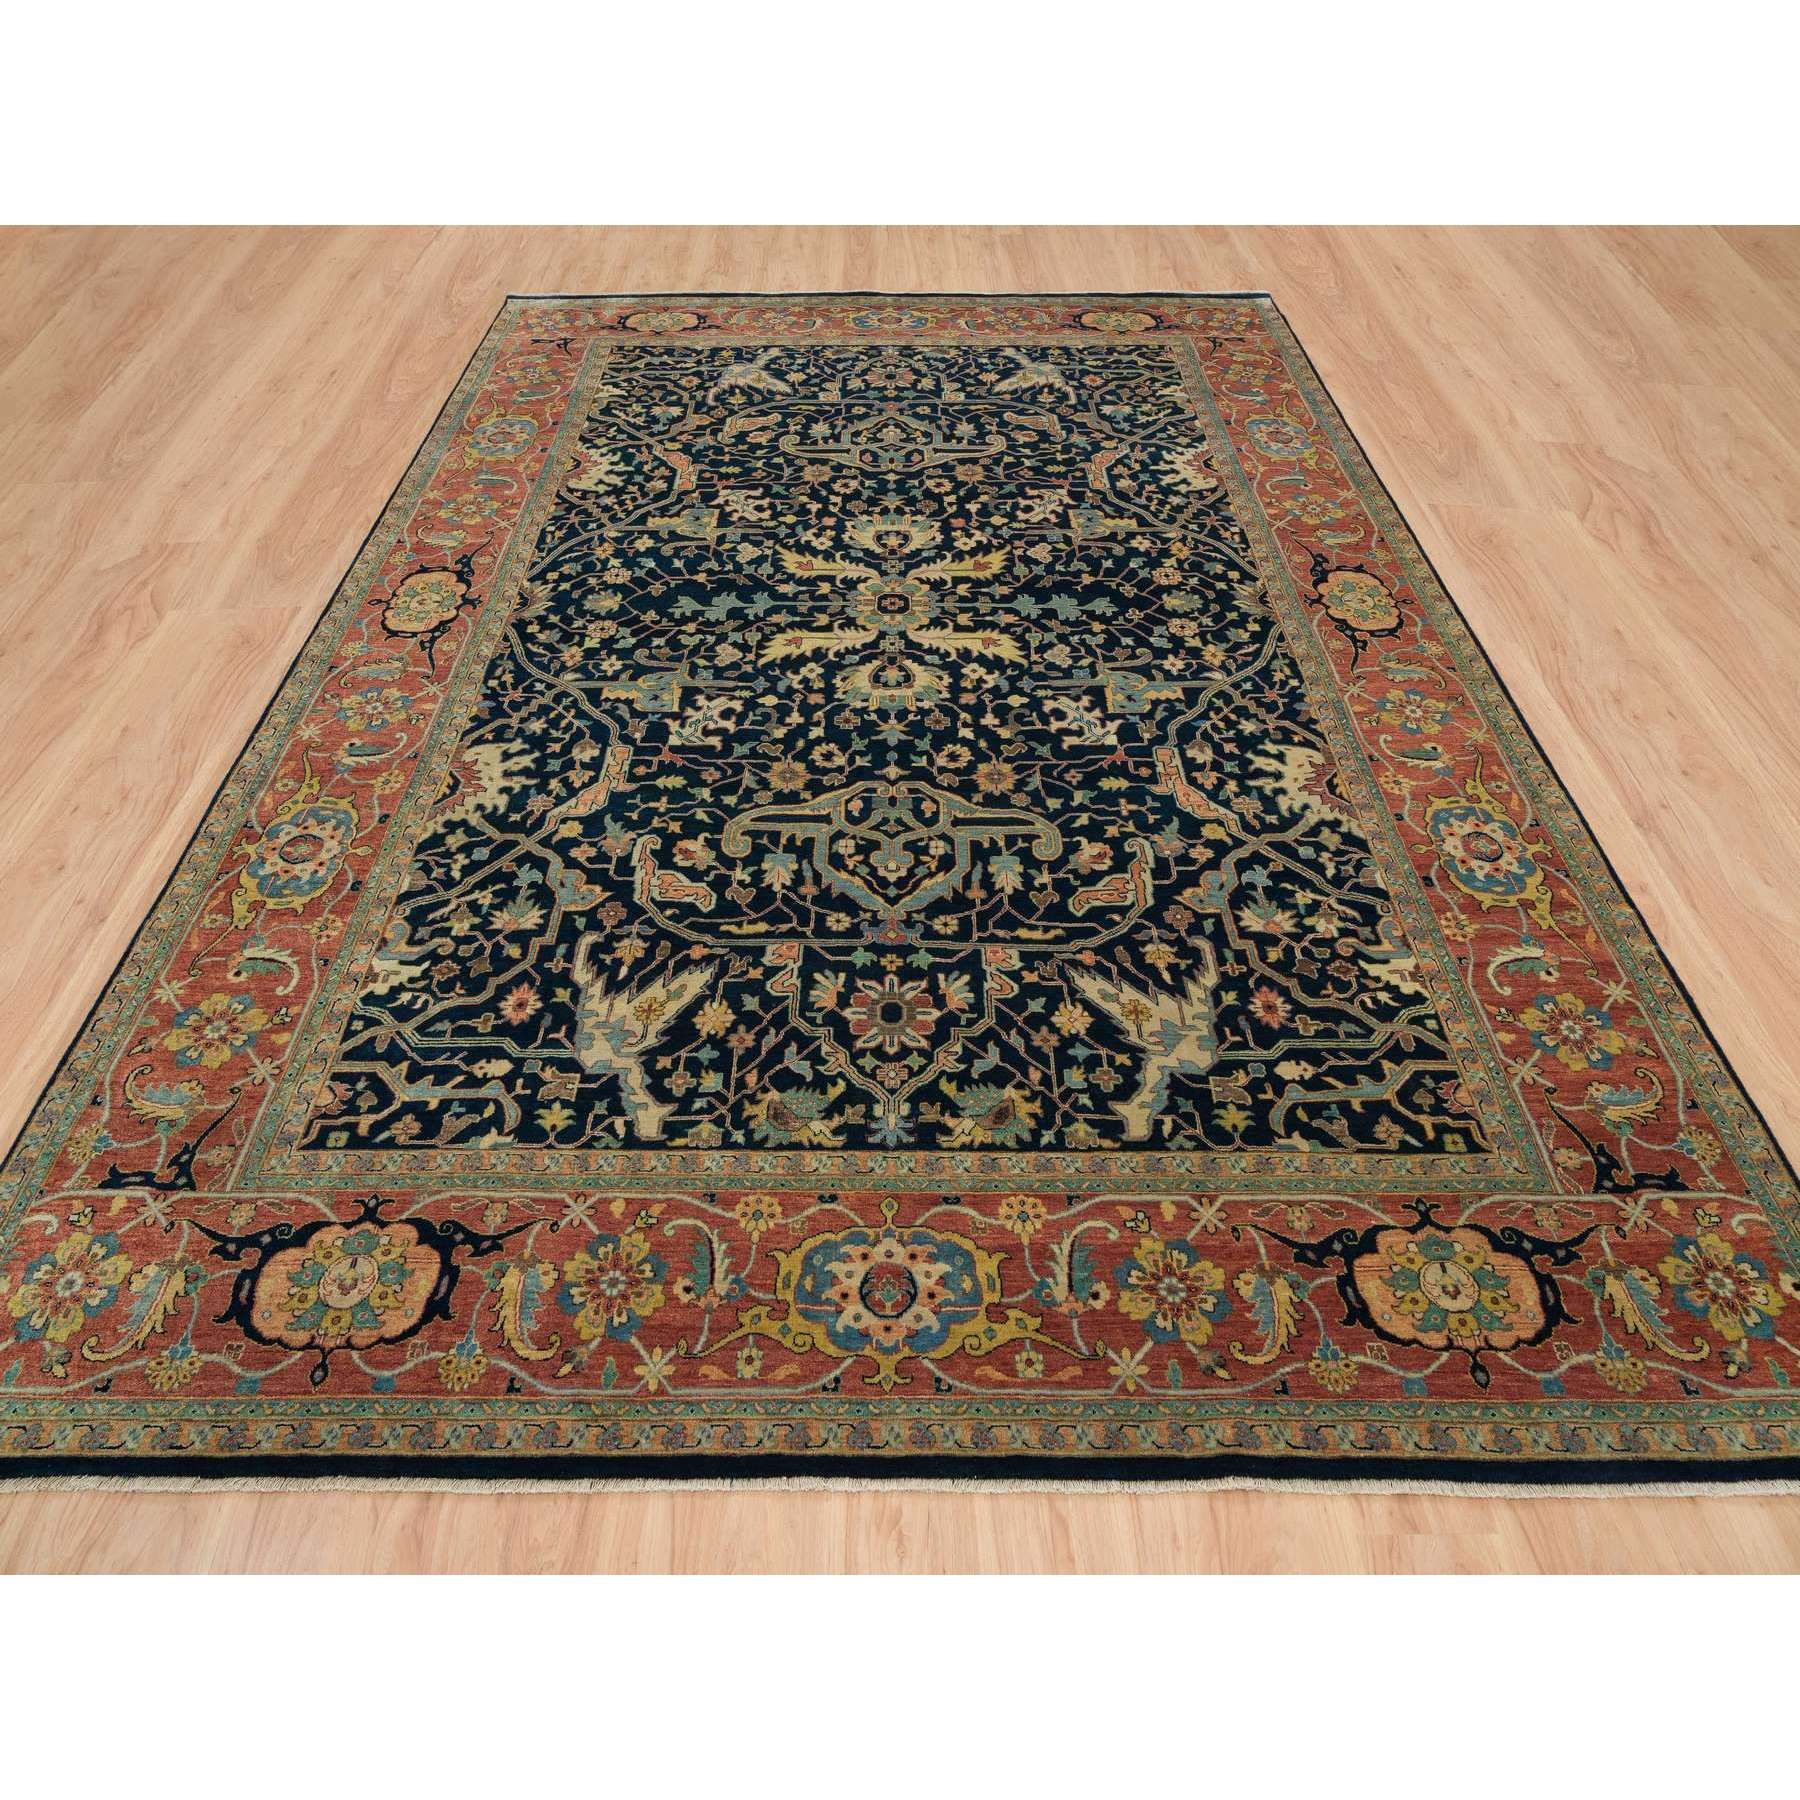 10'x13'10" Terracotta Red with Navy Blue, Pure Wool, Hand Woven, Densely Woven, Antiqued Fine Heriz Re-Creation, Vegetable Dyes, Oriental Rug 